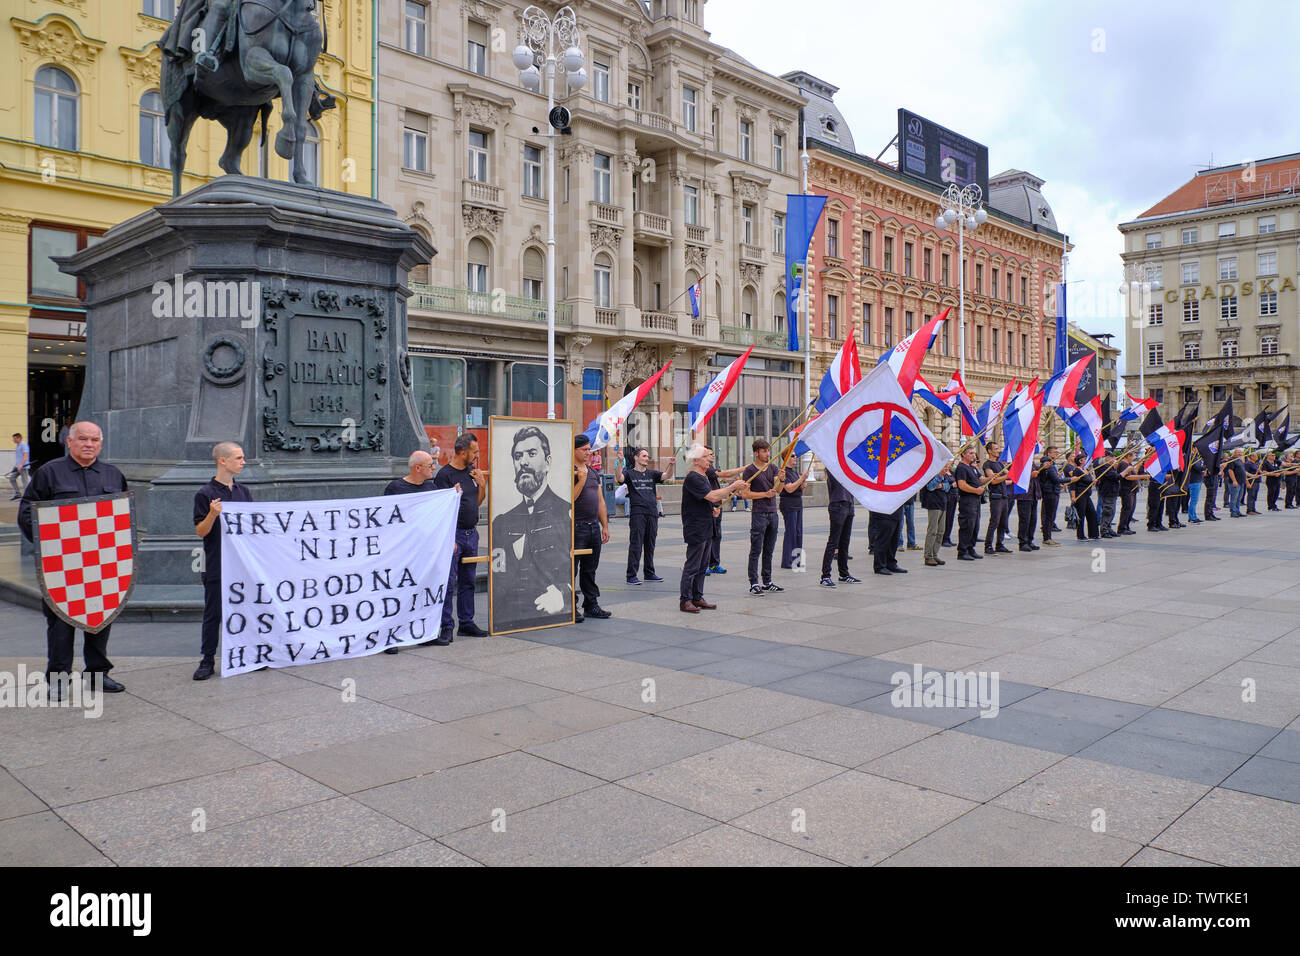 Zagreb, Croatia, June 23, 2019 : HSP lead Right wing political rally , featuring man dressed in black waving Croatian, Black and Anti EU flags Stock Photo